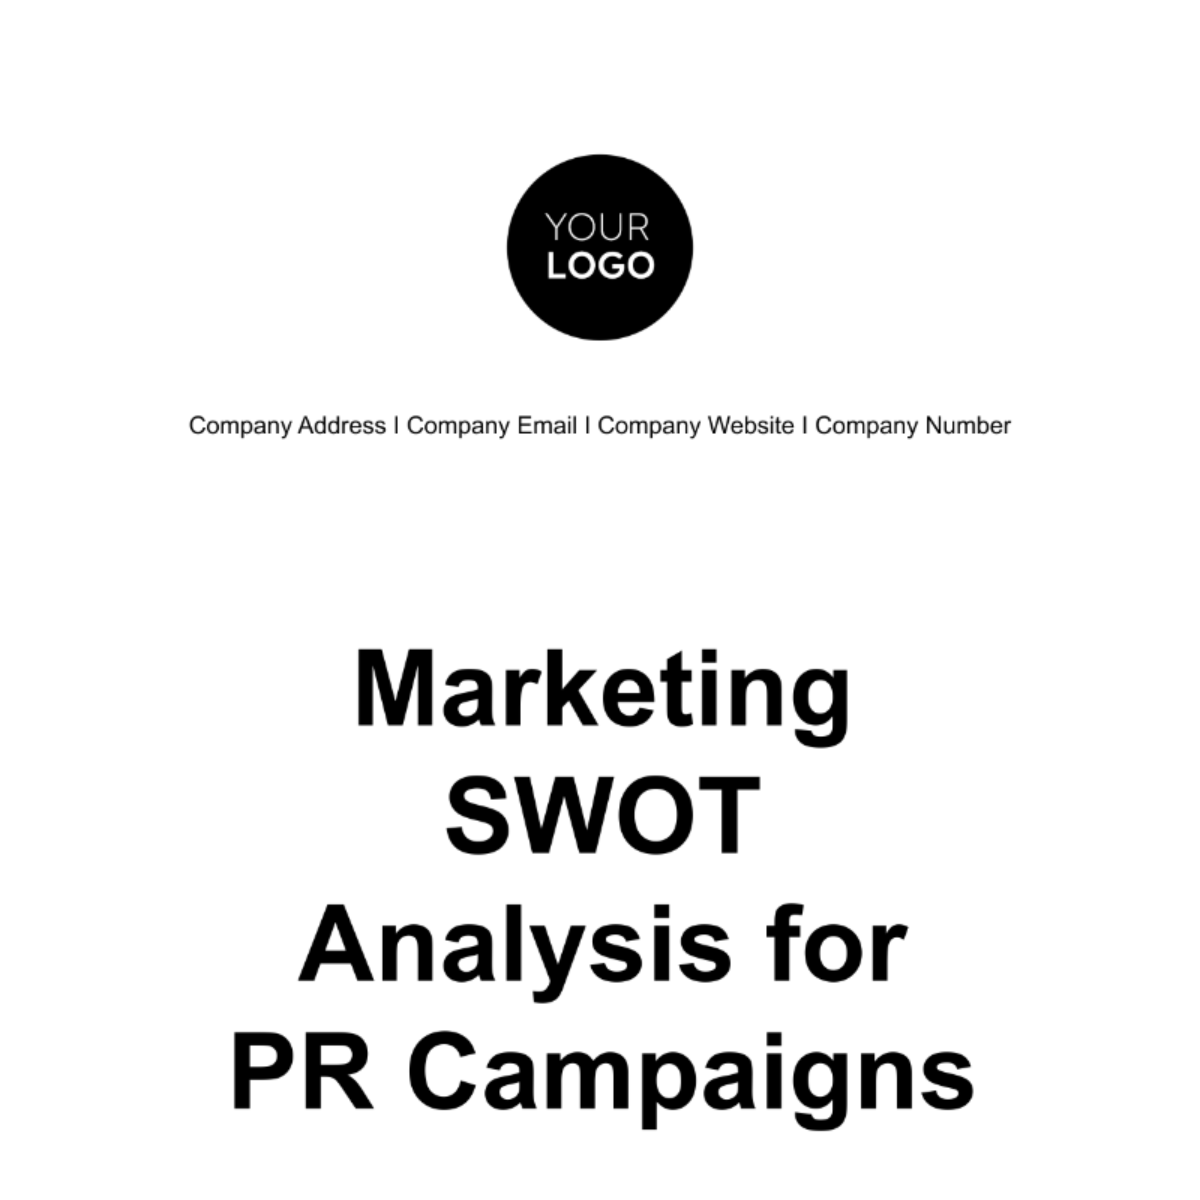 Marketing SWOT Analysis for PR Campaigns Template